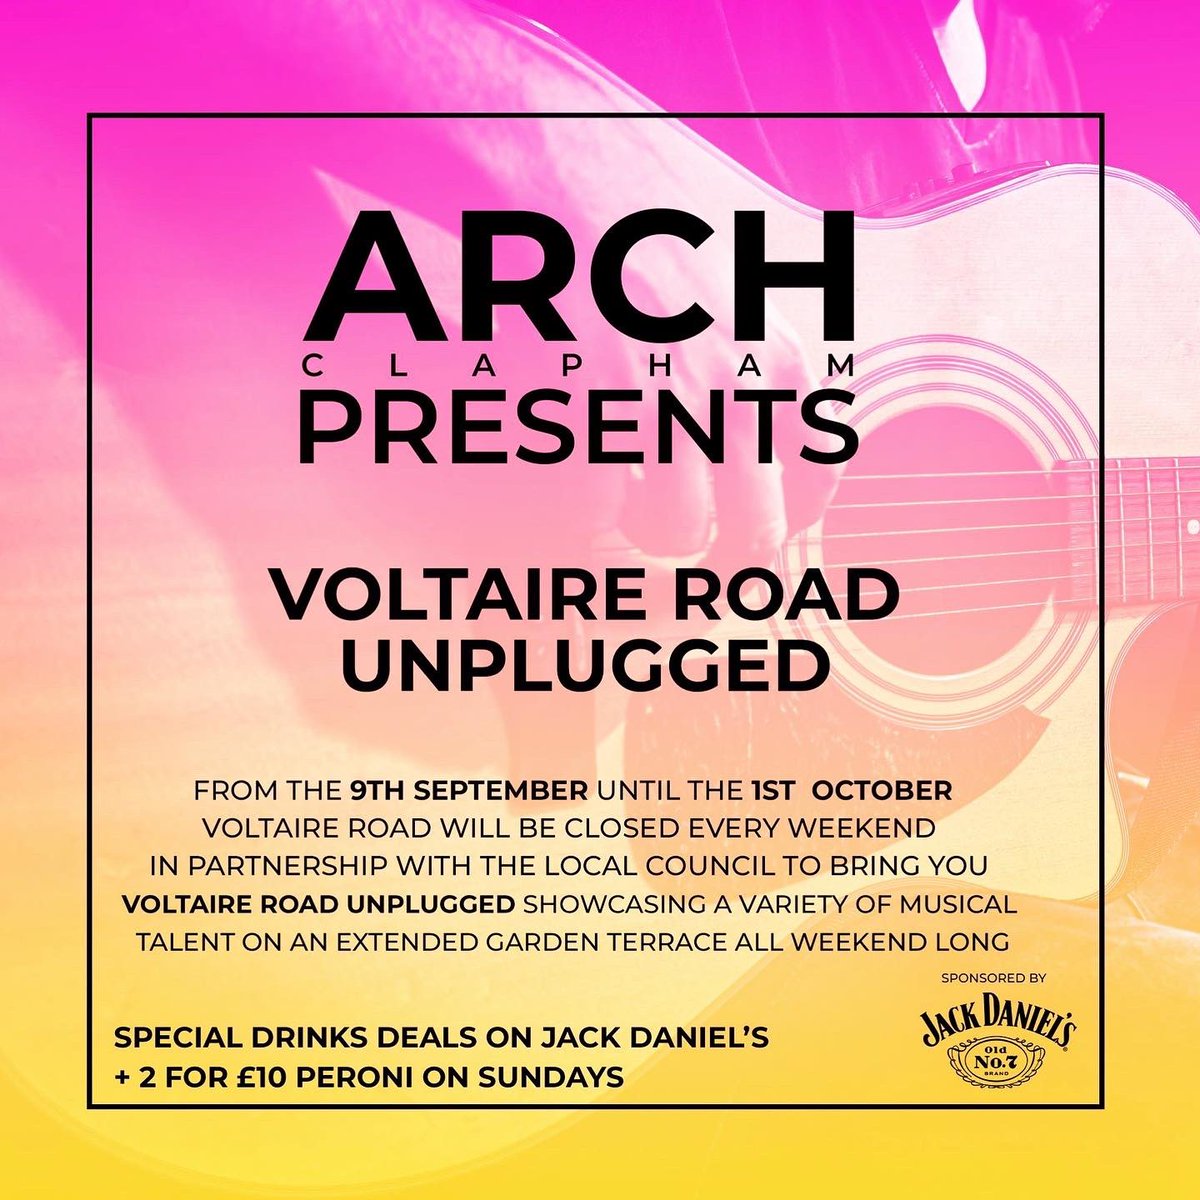 ☀️ September Sun ☀️ We have extended our terrace right onto Voltaire Road for every weekend in September. Head down to enjoy a drink with friends while listening to stunning acoustic artists in our brand new spacious Al Fresco area. #thisisclapham #ArchClapham #clapham